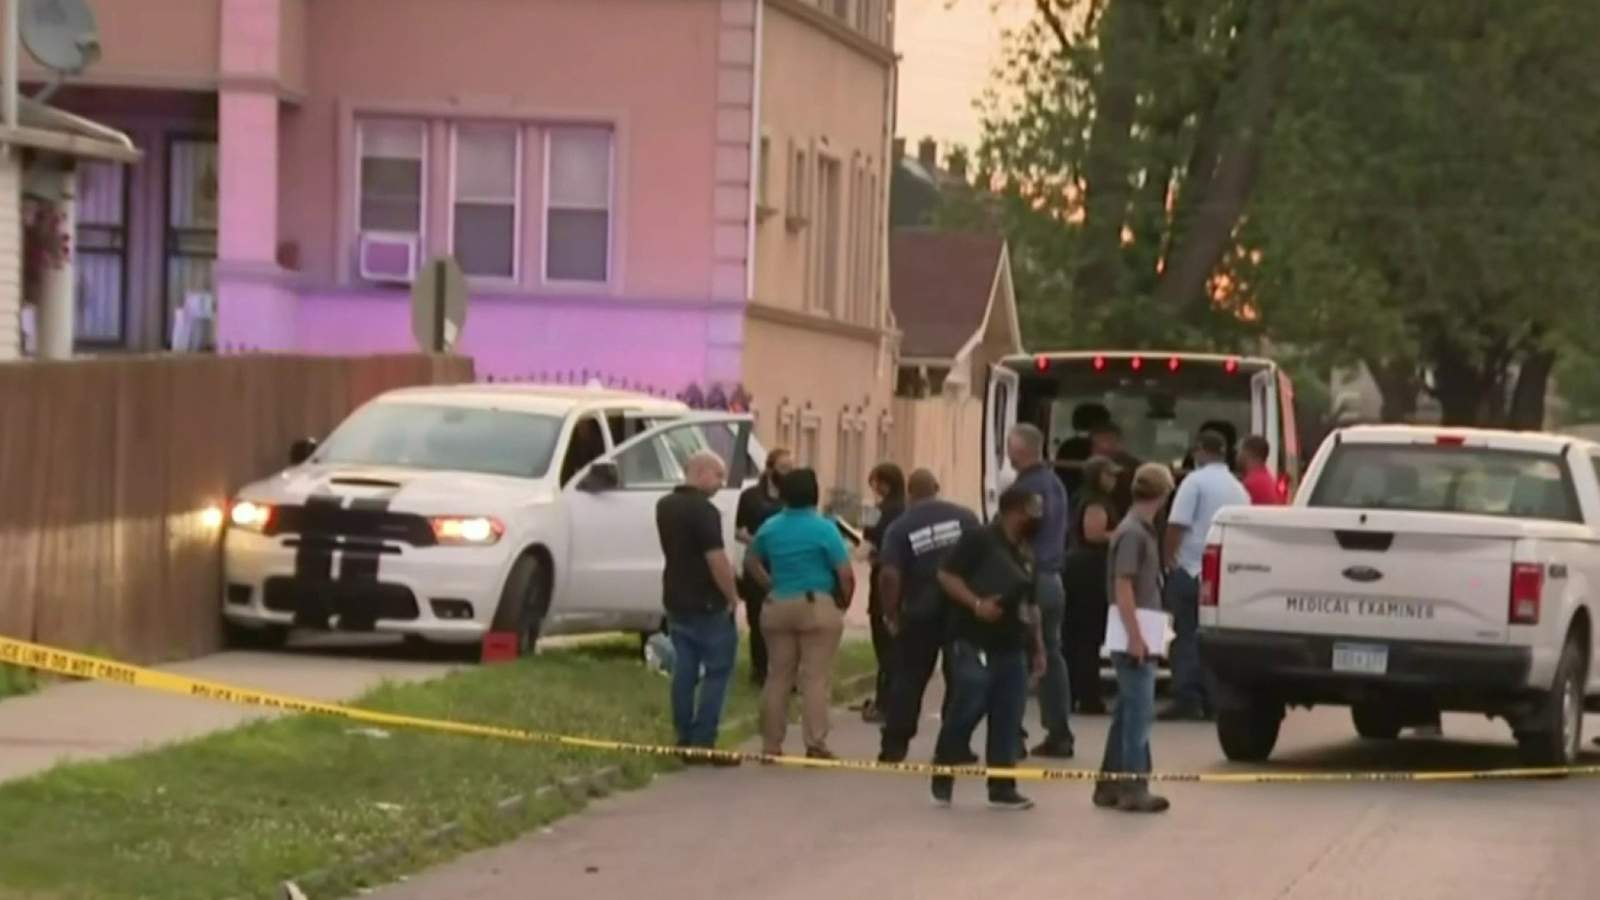 Detroit police investigate quintuple shooting that killed 1, injured 4